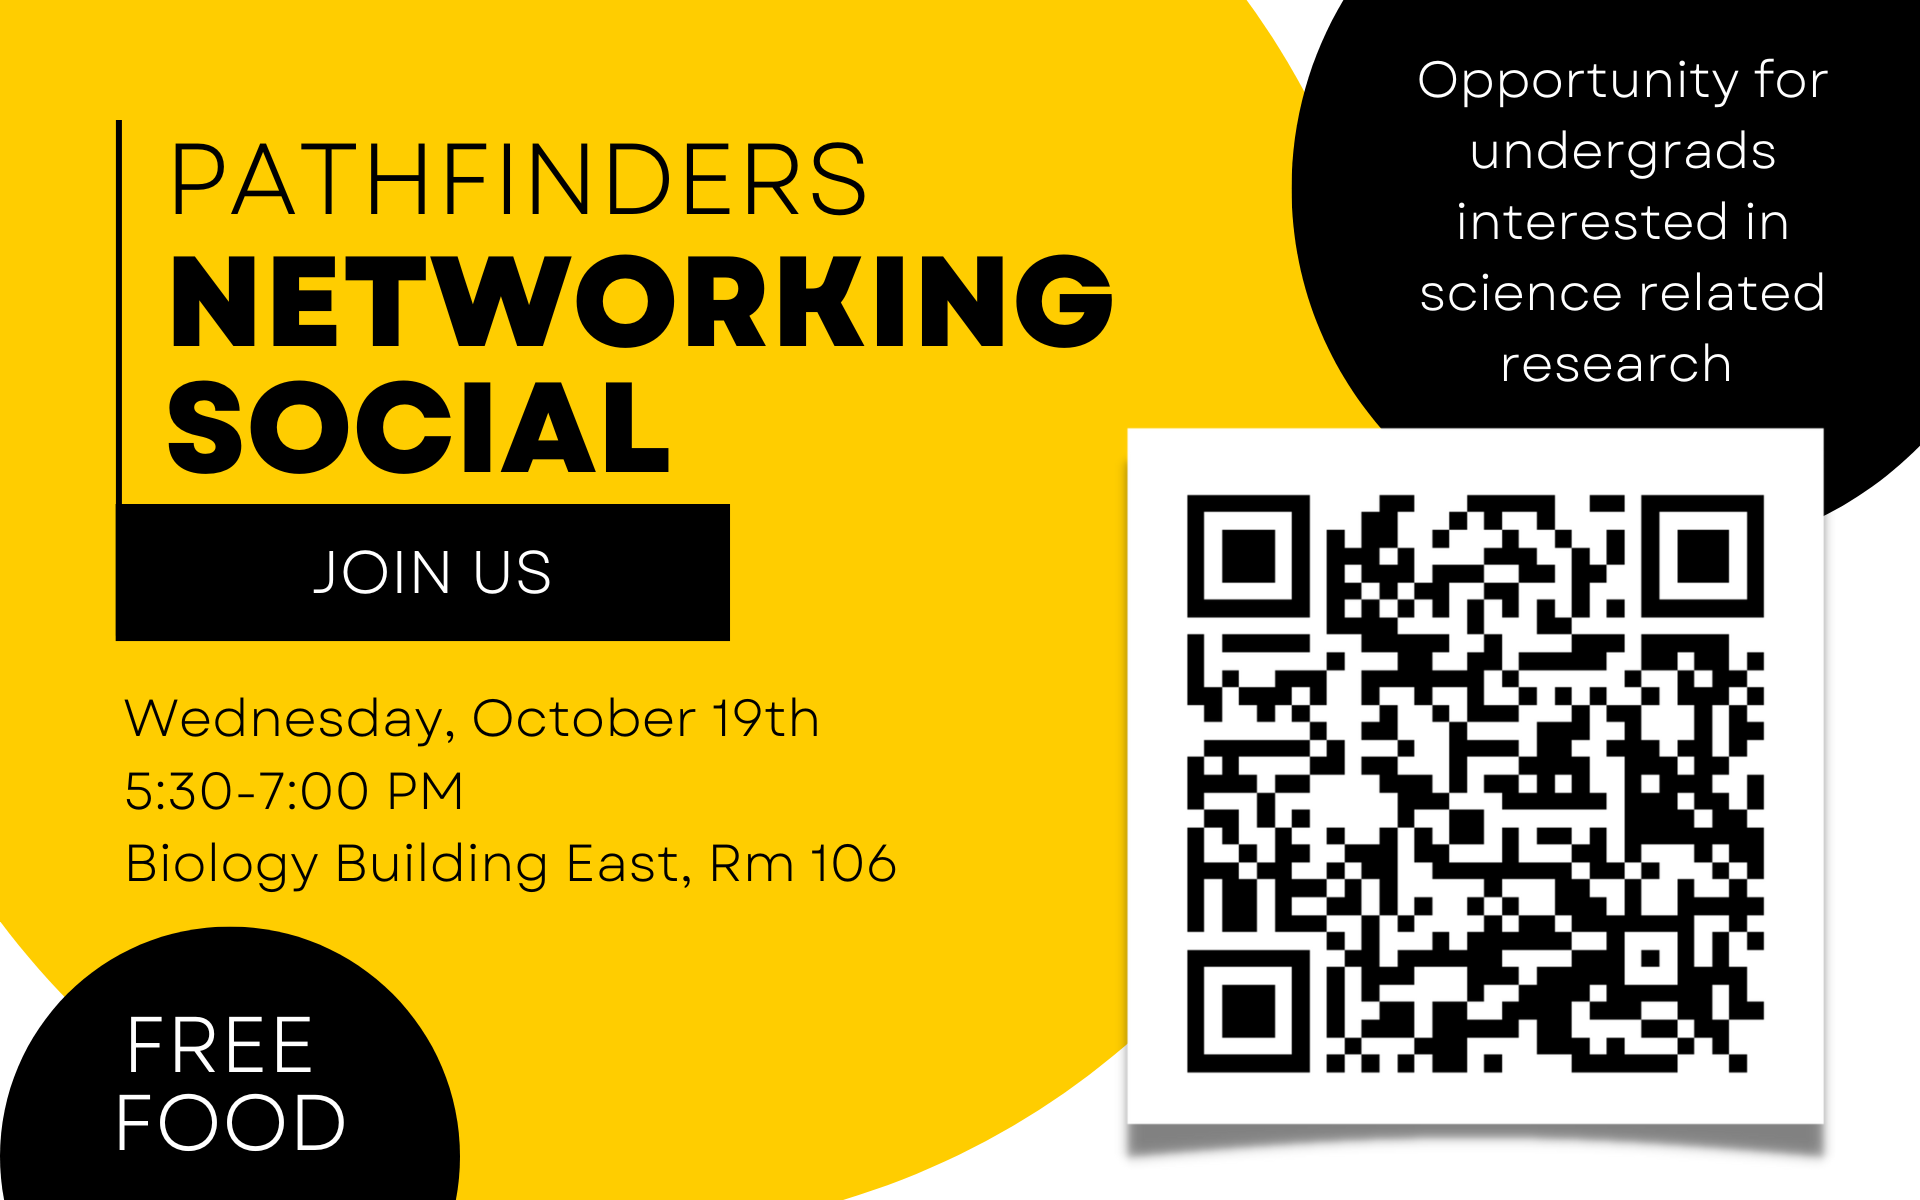 Iowa Sciences Academy Pathfinders Networking Social – Oct. 19th 5:30pm, Biology Building East, Room 106